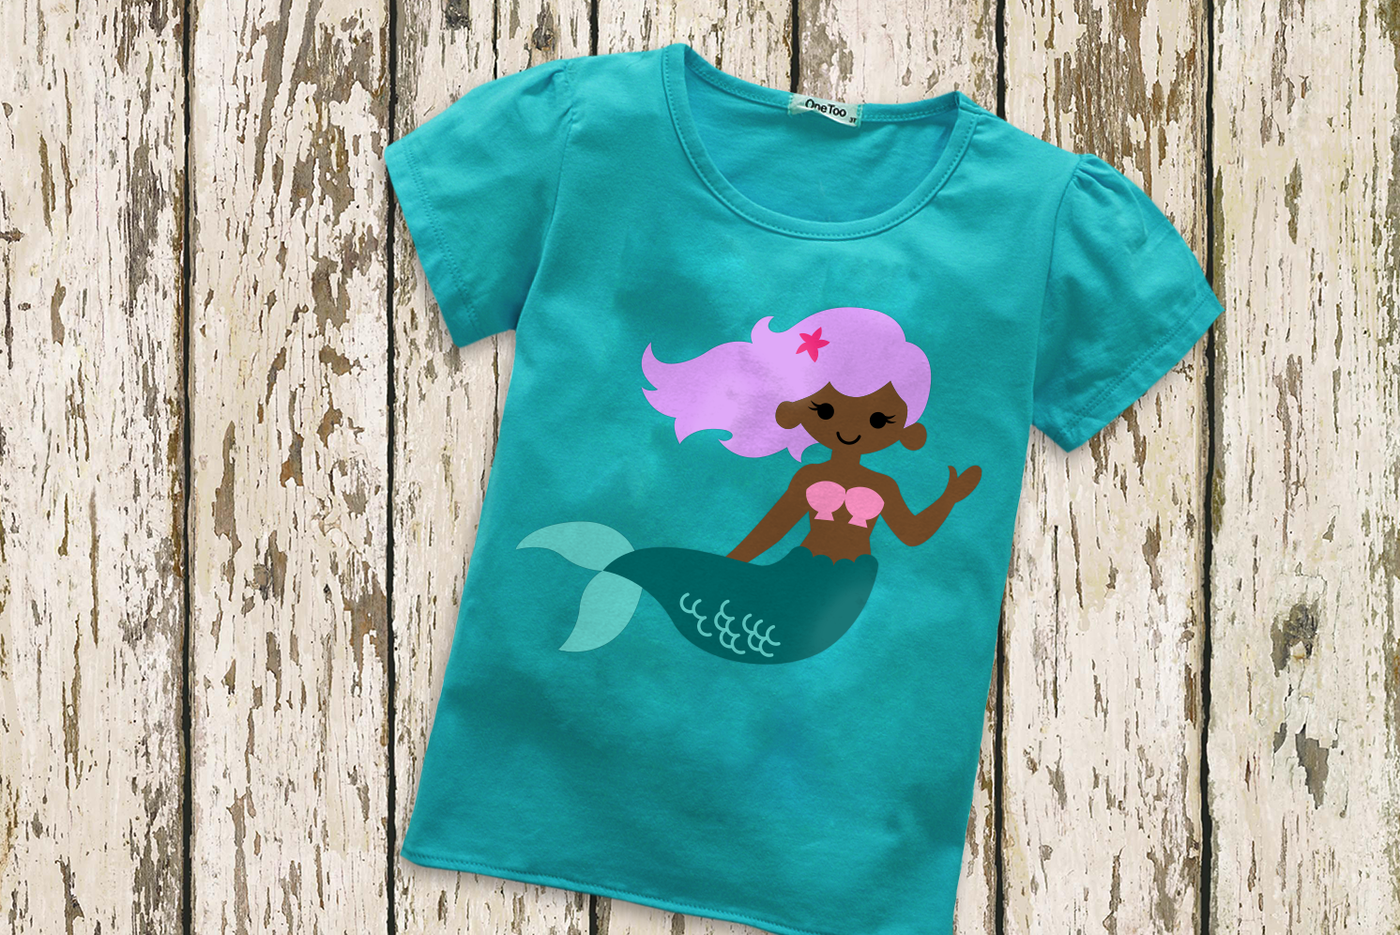 A turquoise child's tee with a black mermaid with lavender hair and a teal tail.